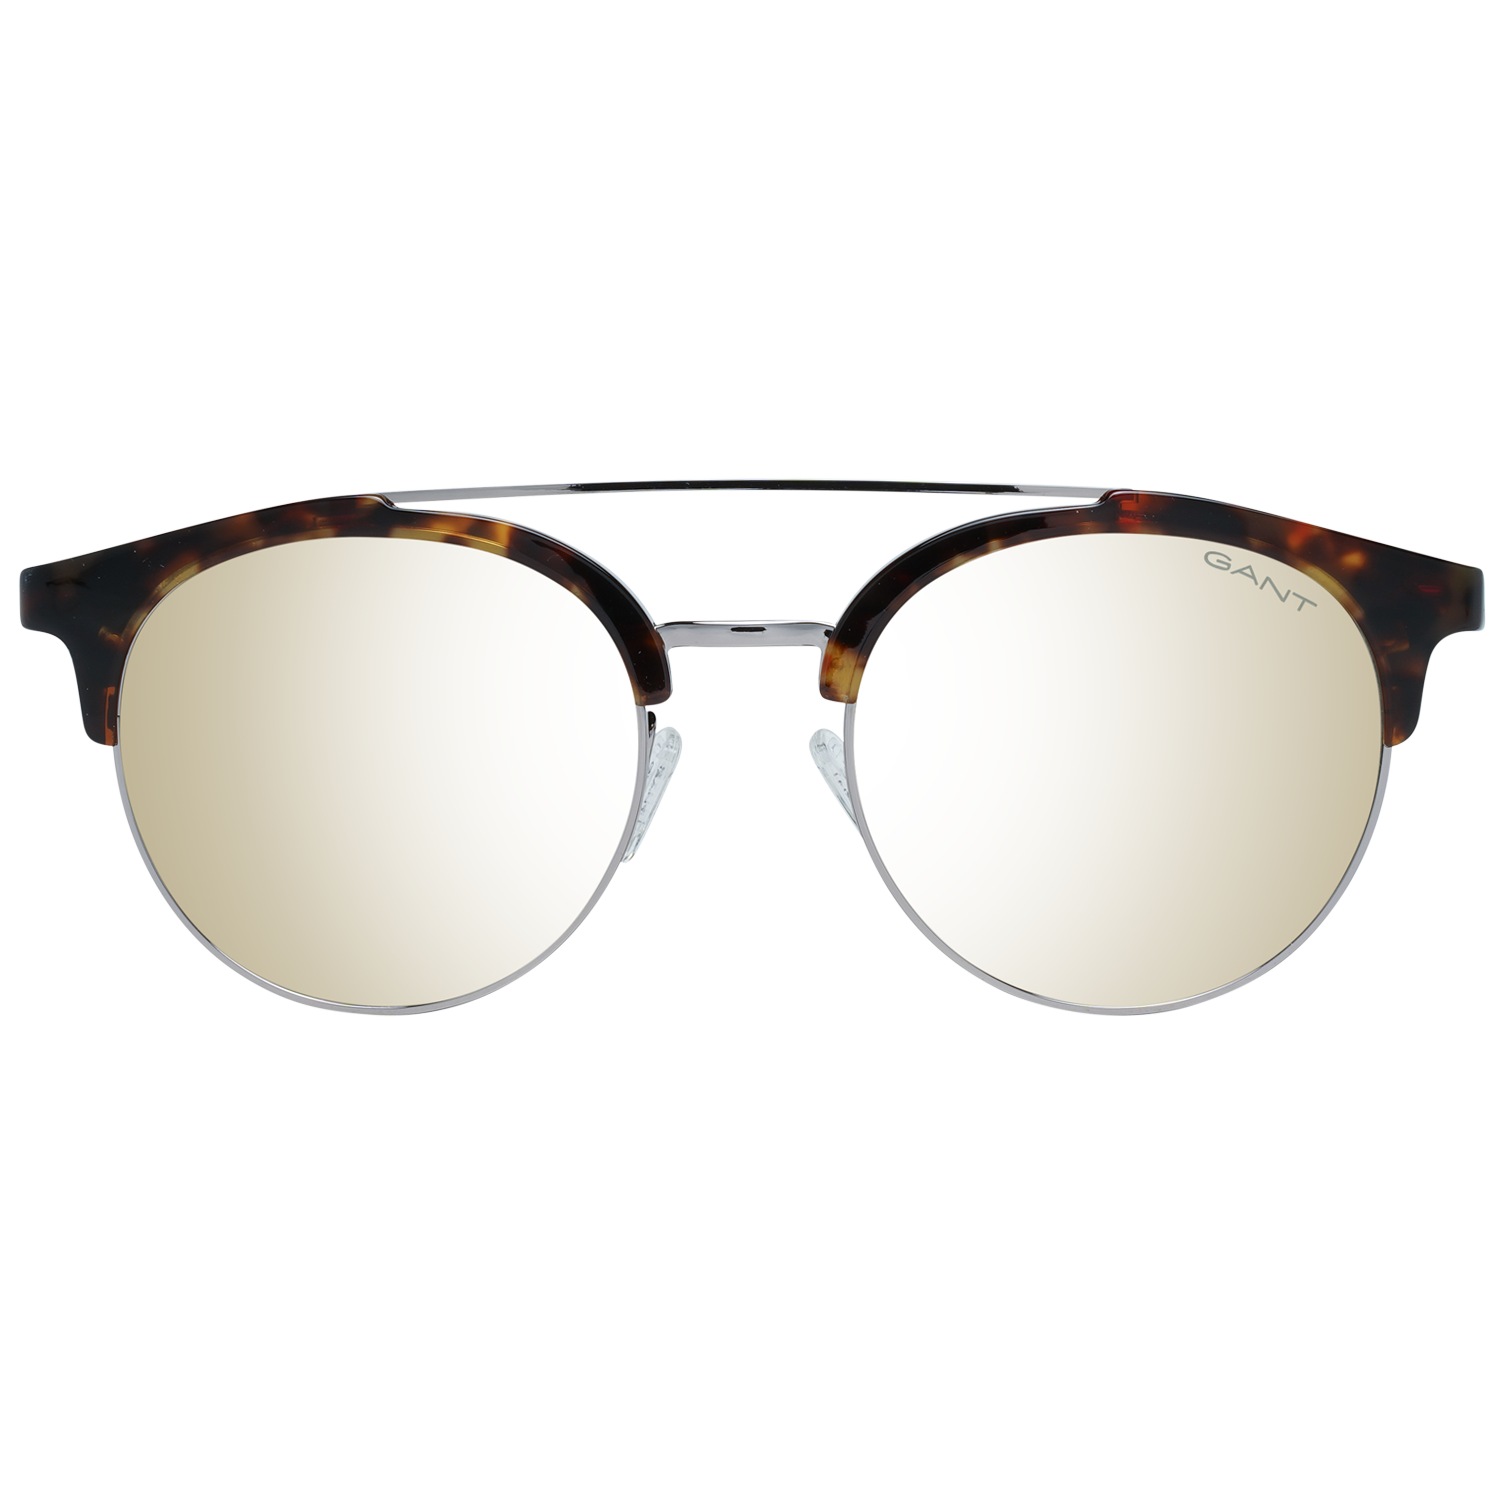 GenderMenMain colorBrownFrame colorBrownFrame materialMetal & PlasticLenses colorGoldLenses materialPlasticFilter category3StyleRoundLenses effectMirroredProtection100% UVA & UVBSize52-20-145Lenses width52mmLenses height47mmBridge width20mmFrame width143mmTemples length145mmShipment includesCase, cleaning clothSpring hingeNo